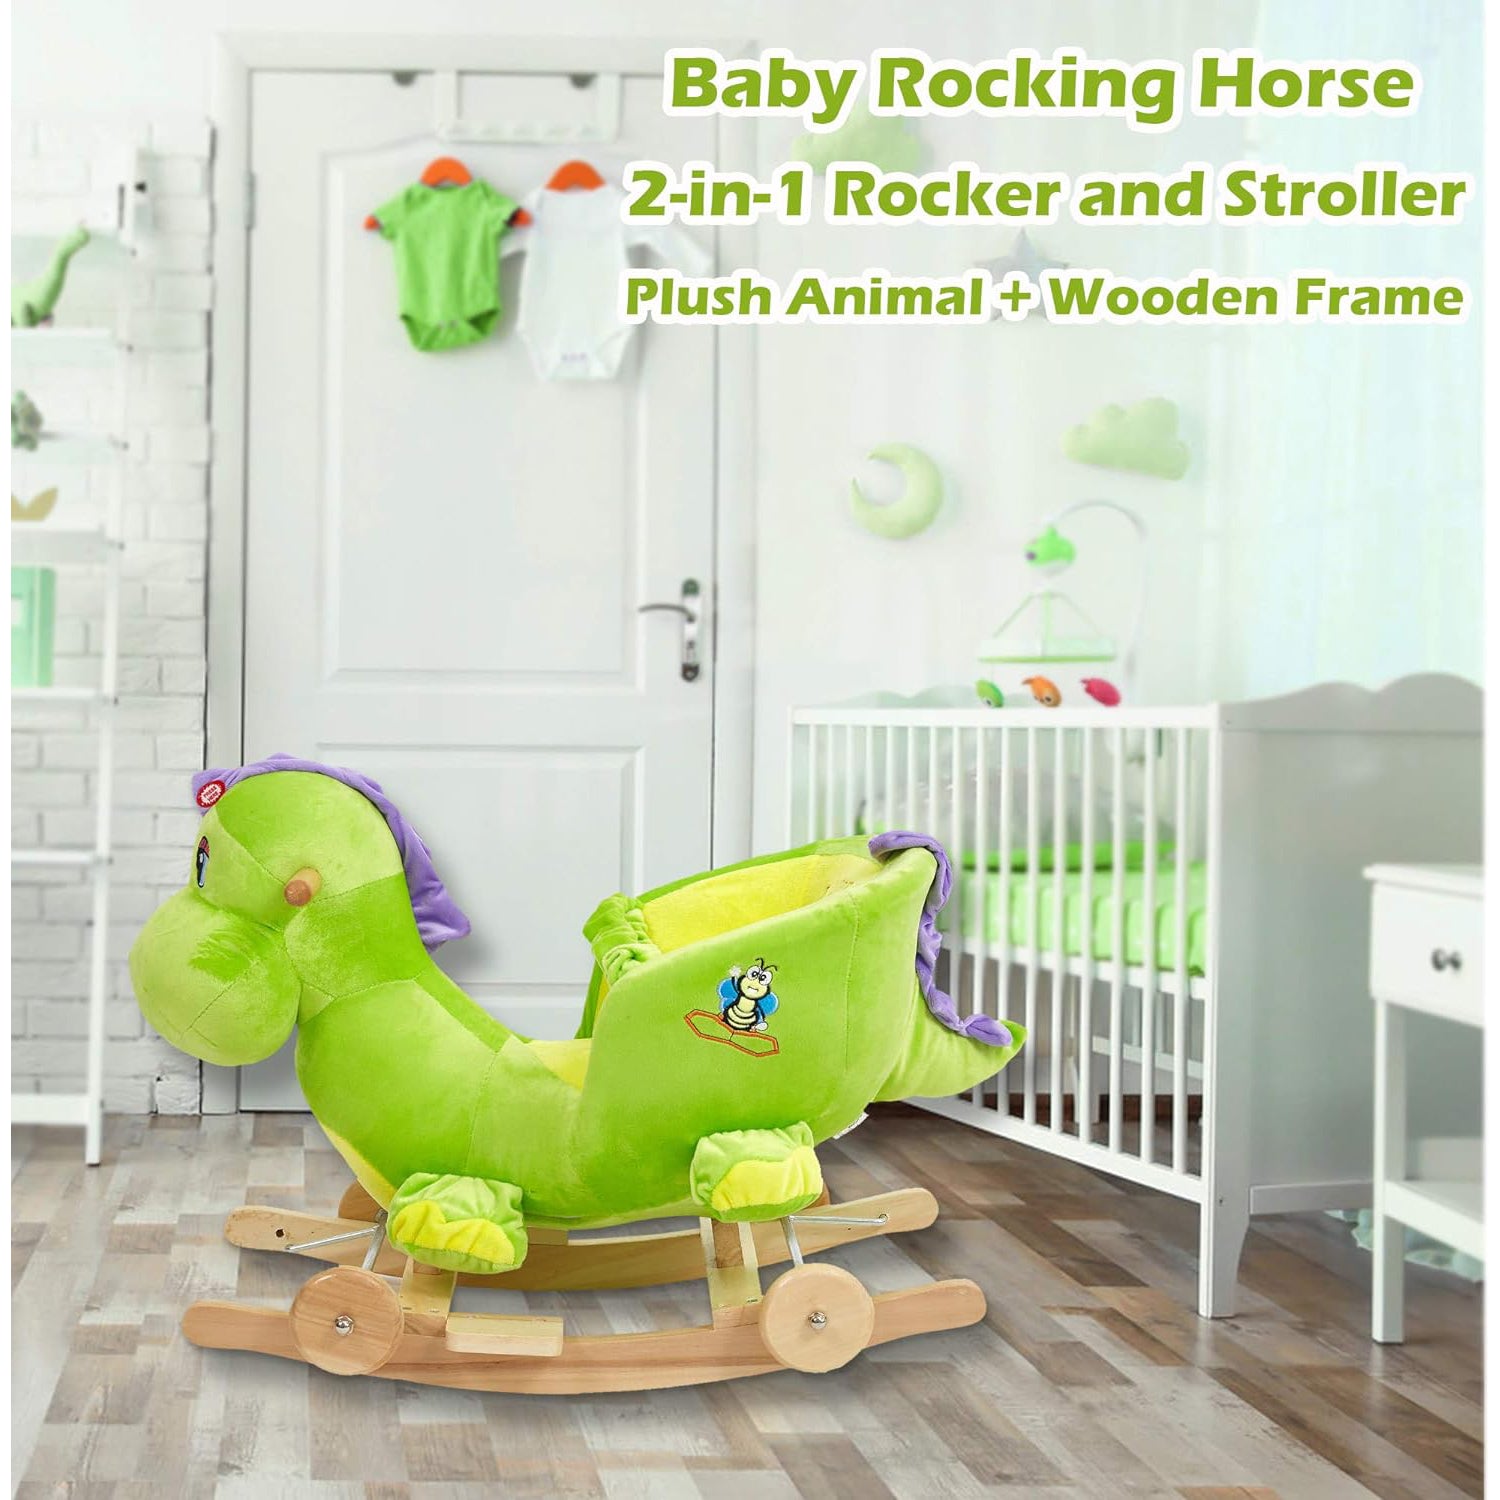 2-in-1 Ride-on Wooden Plush Rocking Horse Chair with Music for Baby Kids Toddlers, Green Dinosaur